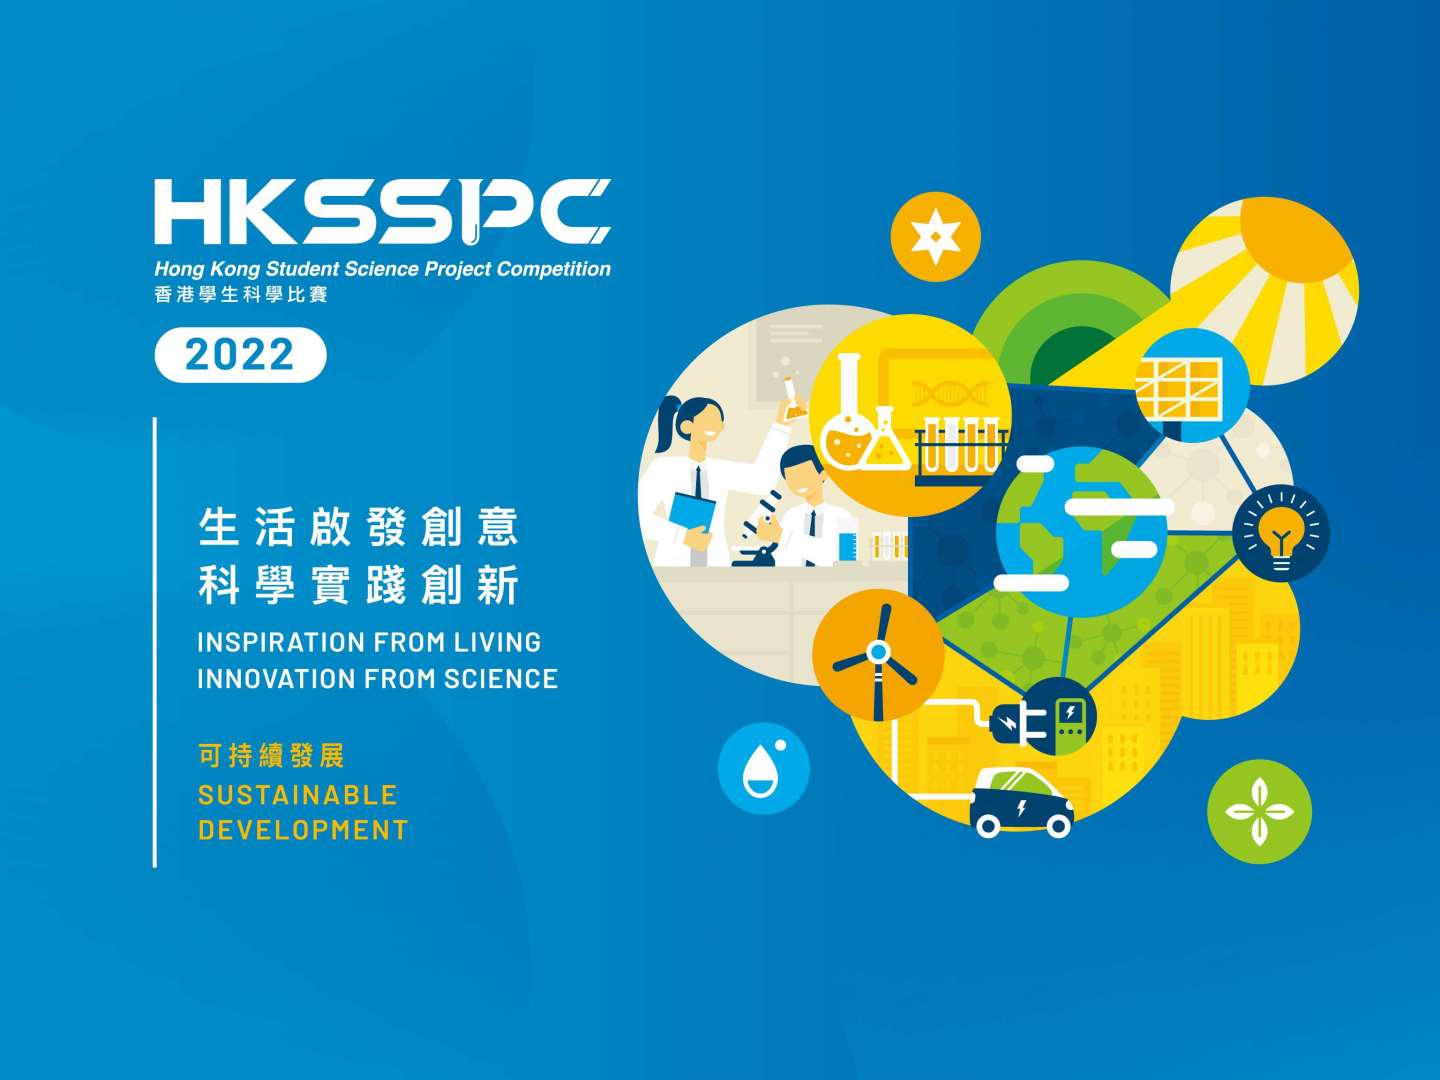 hksspc-2022-competition-details-hong-kong-student-science-project